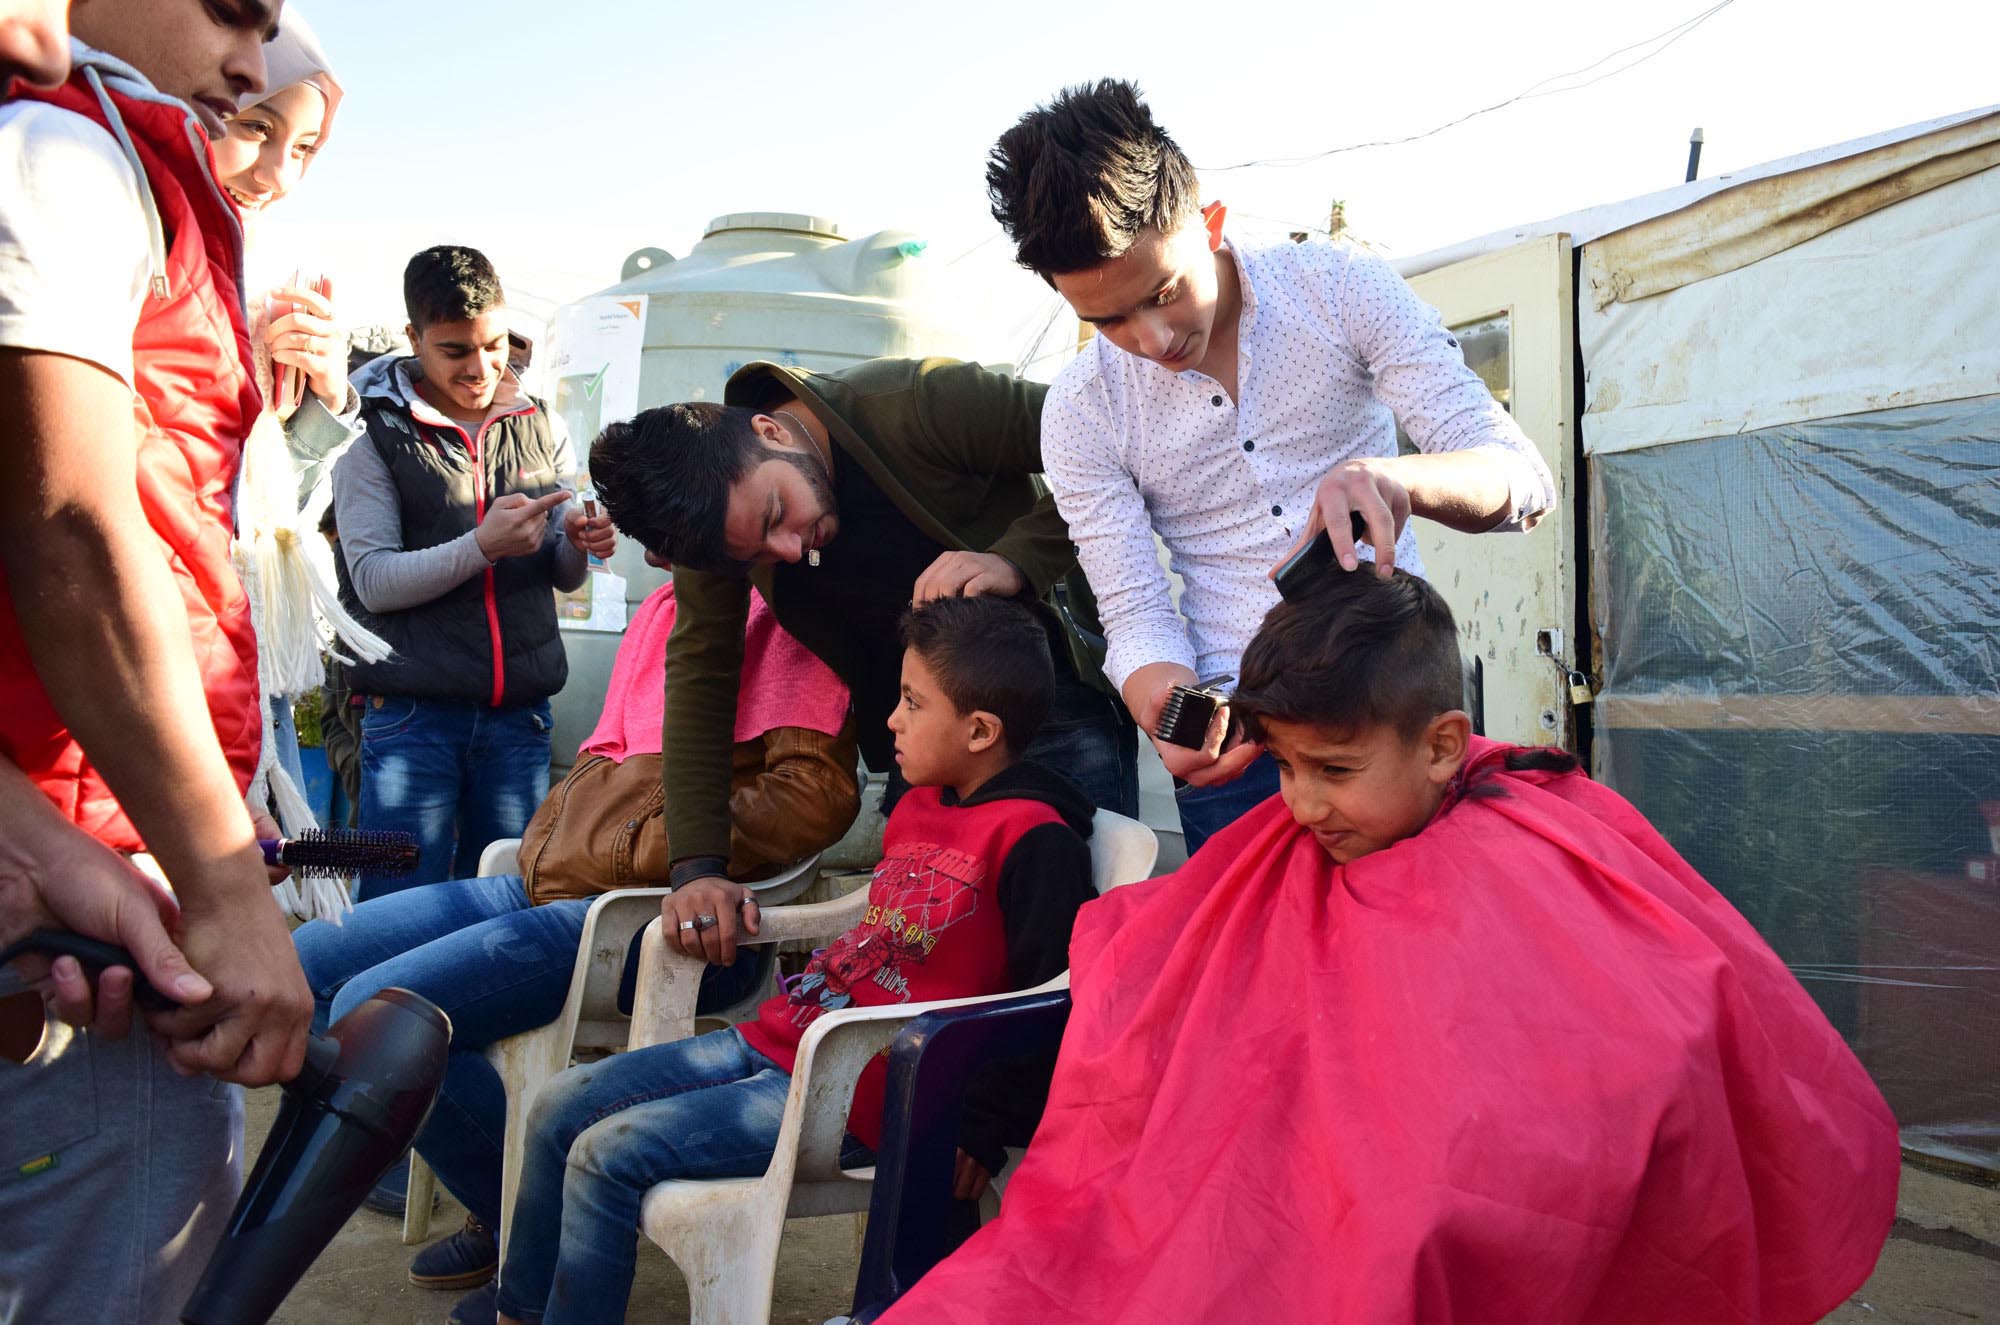 Ayham Dakar, 16, along with six other graduates from Anera's hairdressing course for men visited an informal tented settlement for Syrian refugees in Jib Jannine, West Bekaa. This open day in 2017 provided complimentary haircuts for men and boys.